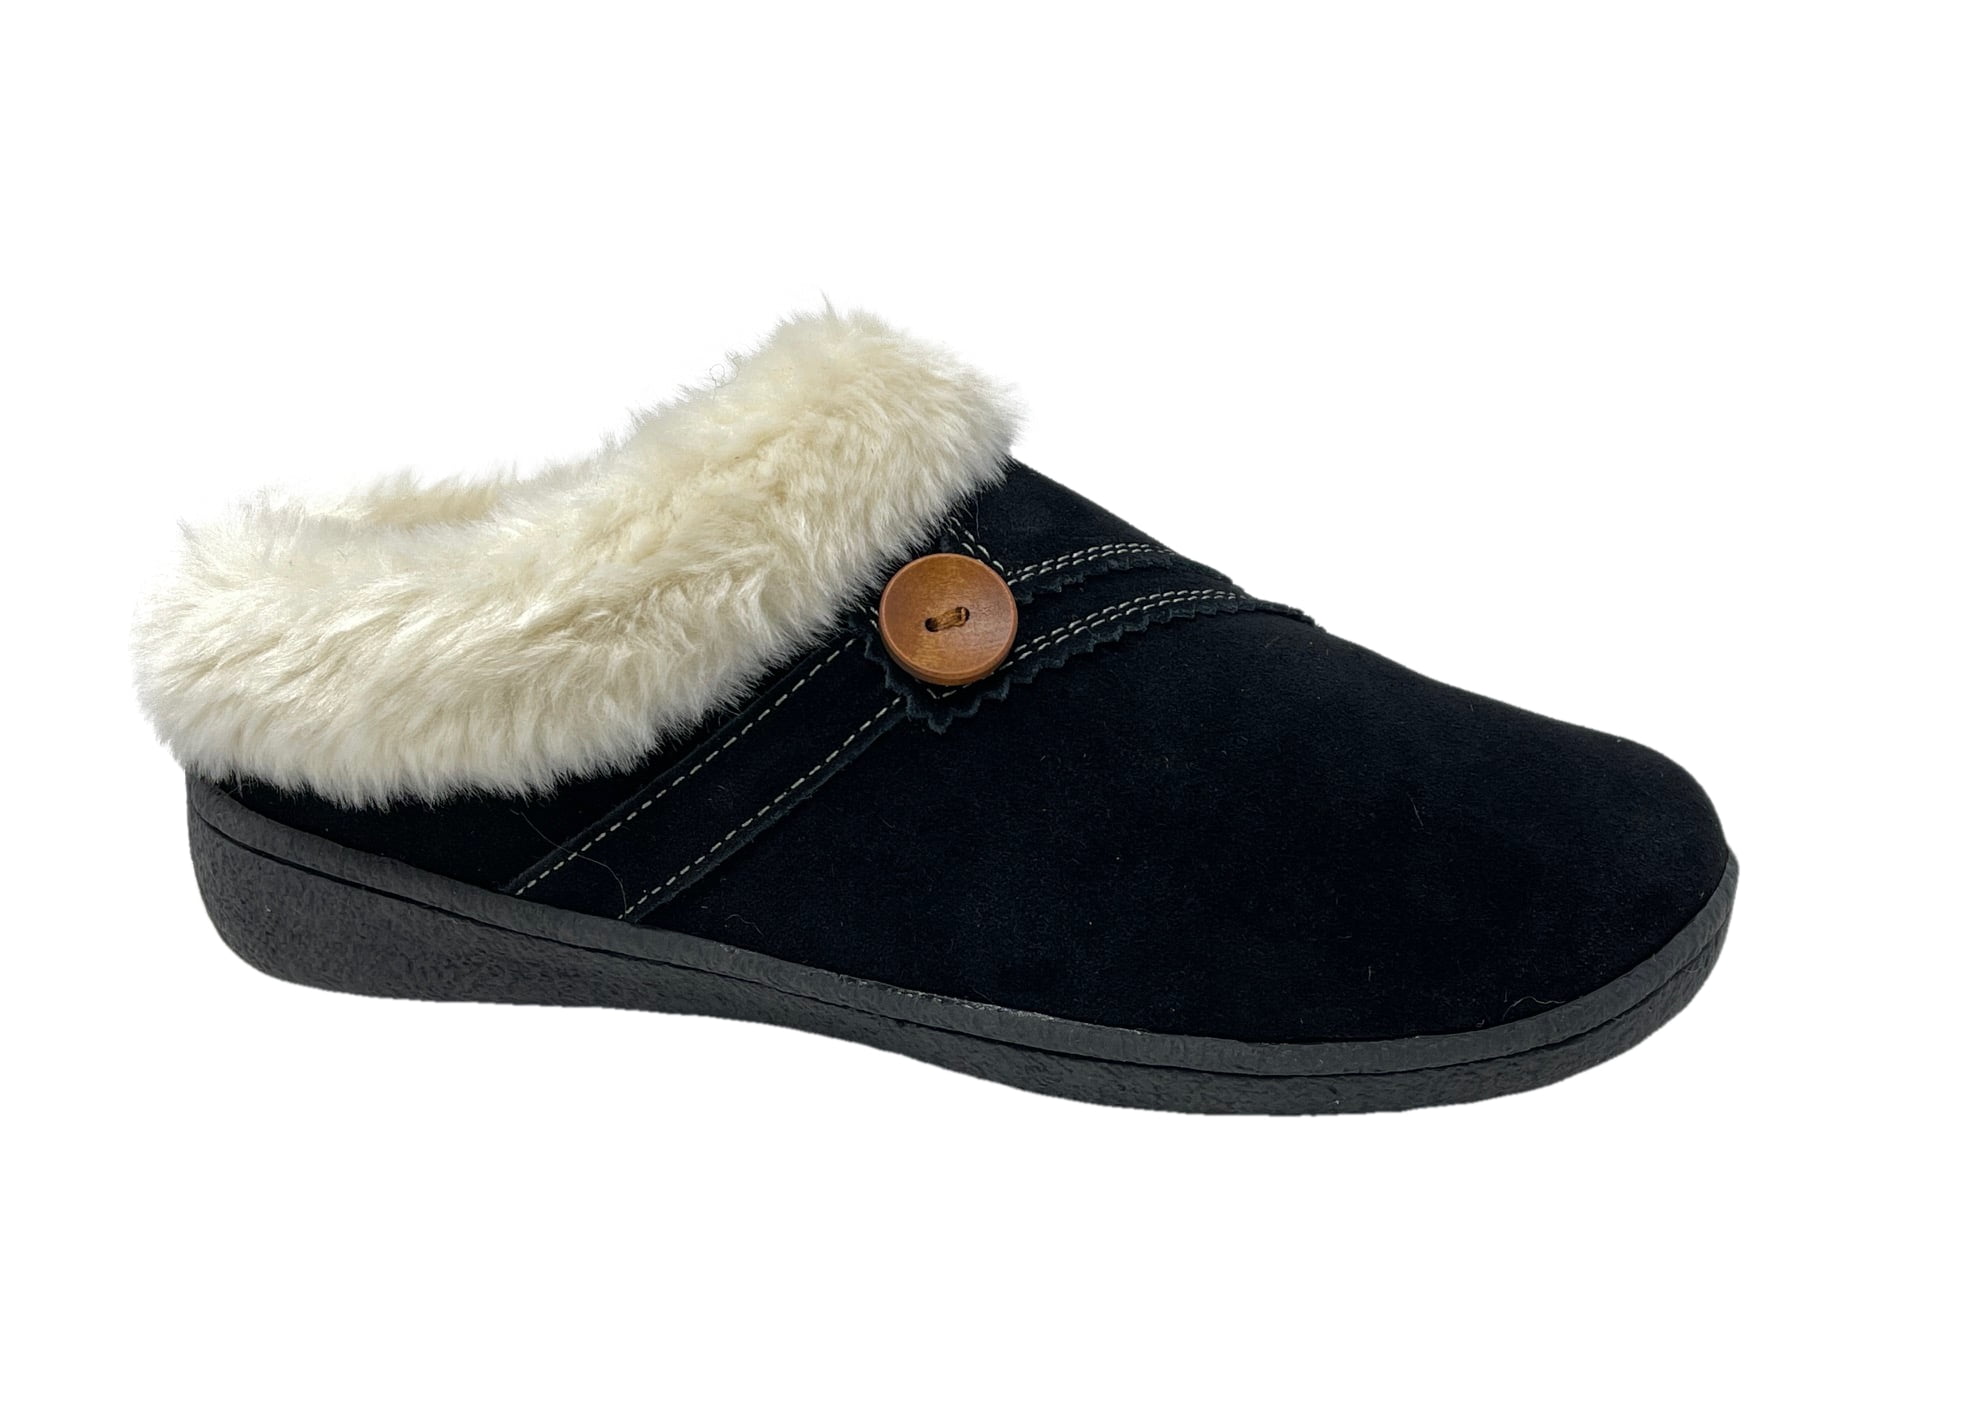 Clarks Womens Suede Leather Faux Fur Lining Slippers JMS0411B (6 M US ...